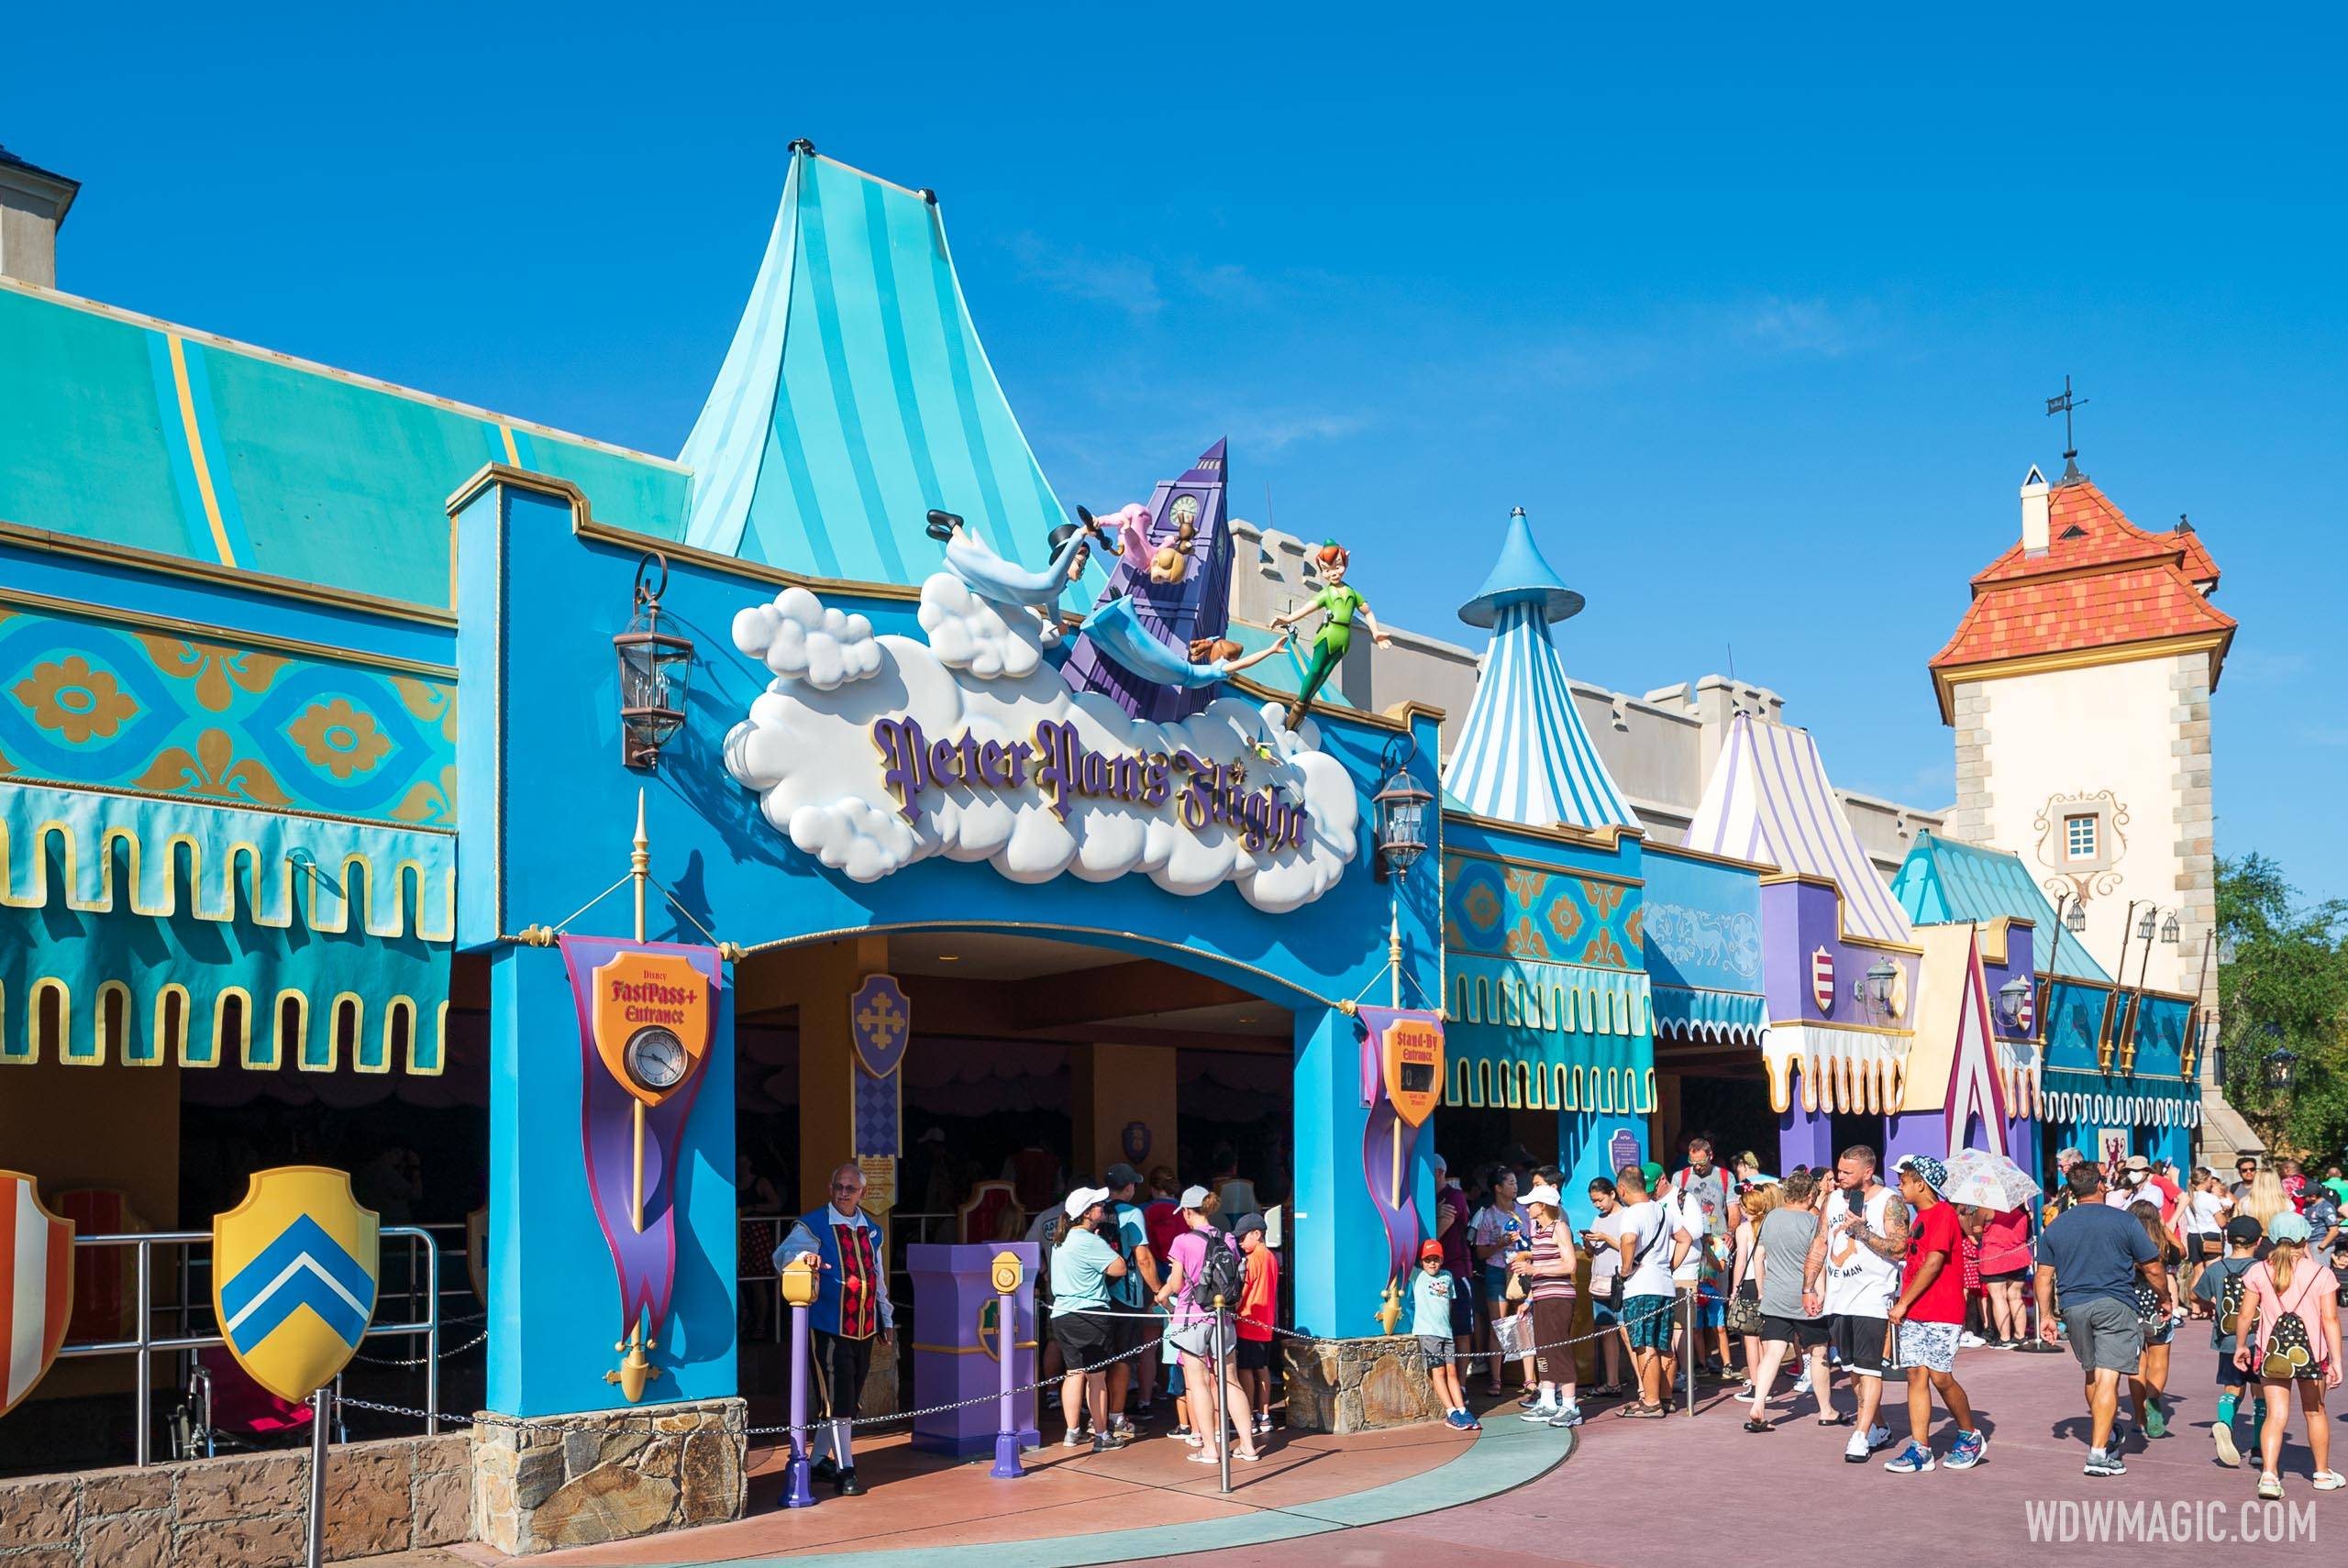 Peter Pan's Flight to get extended queue and former Skyway Station to become restrooms